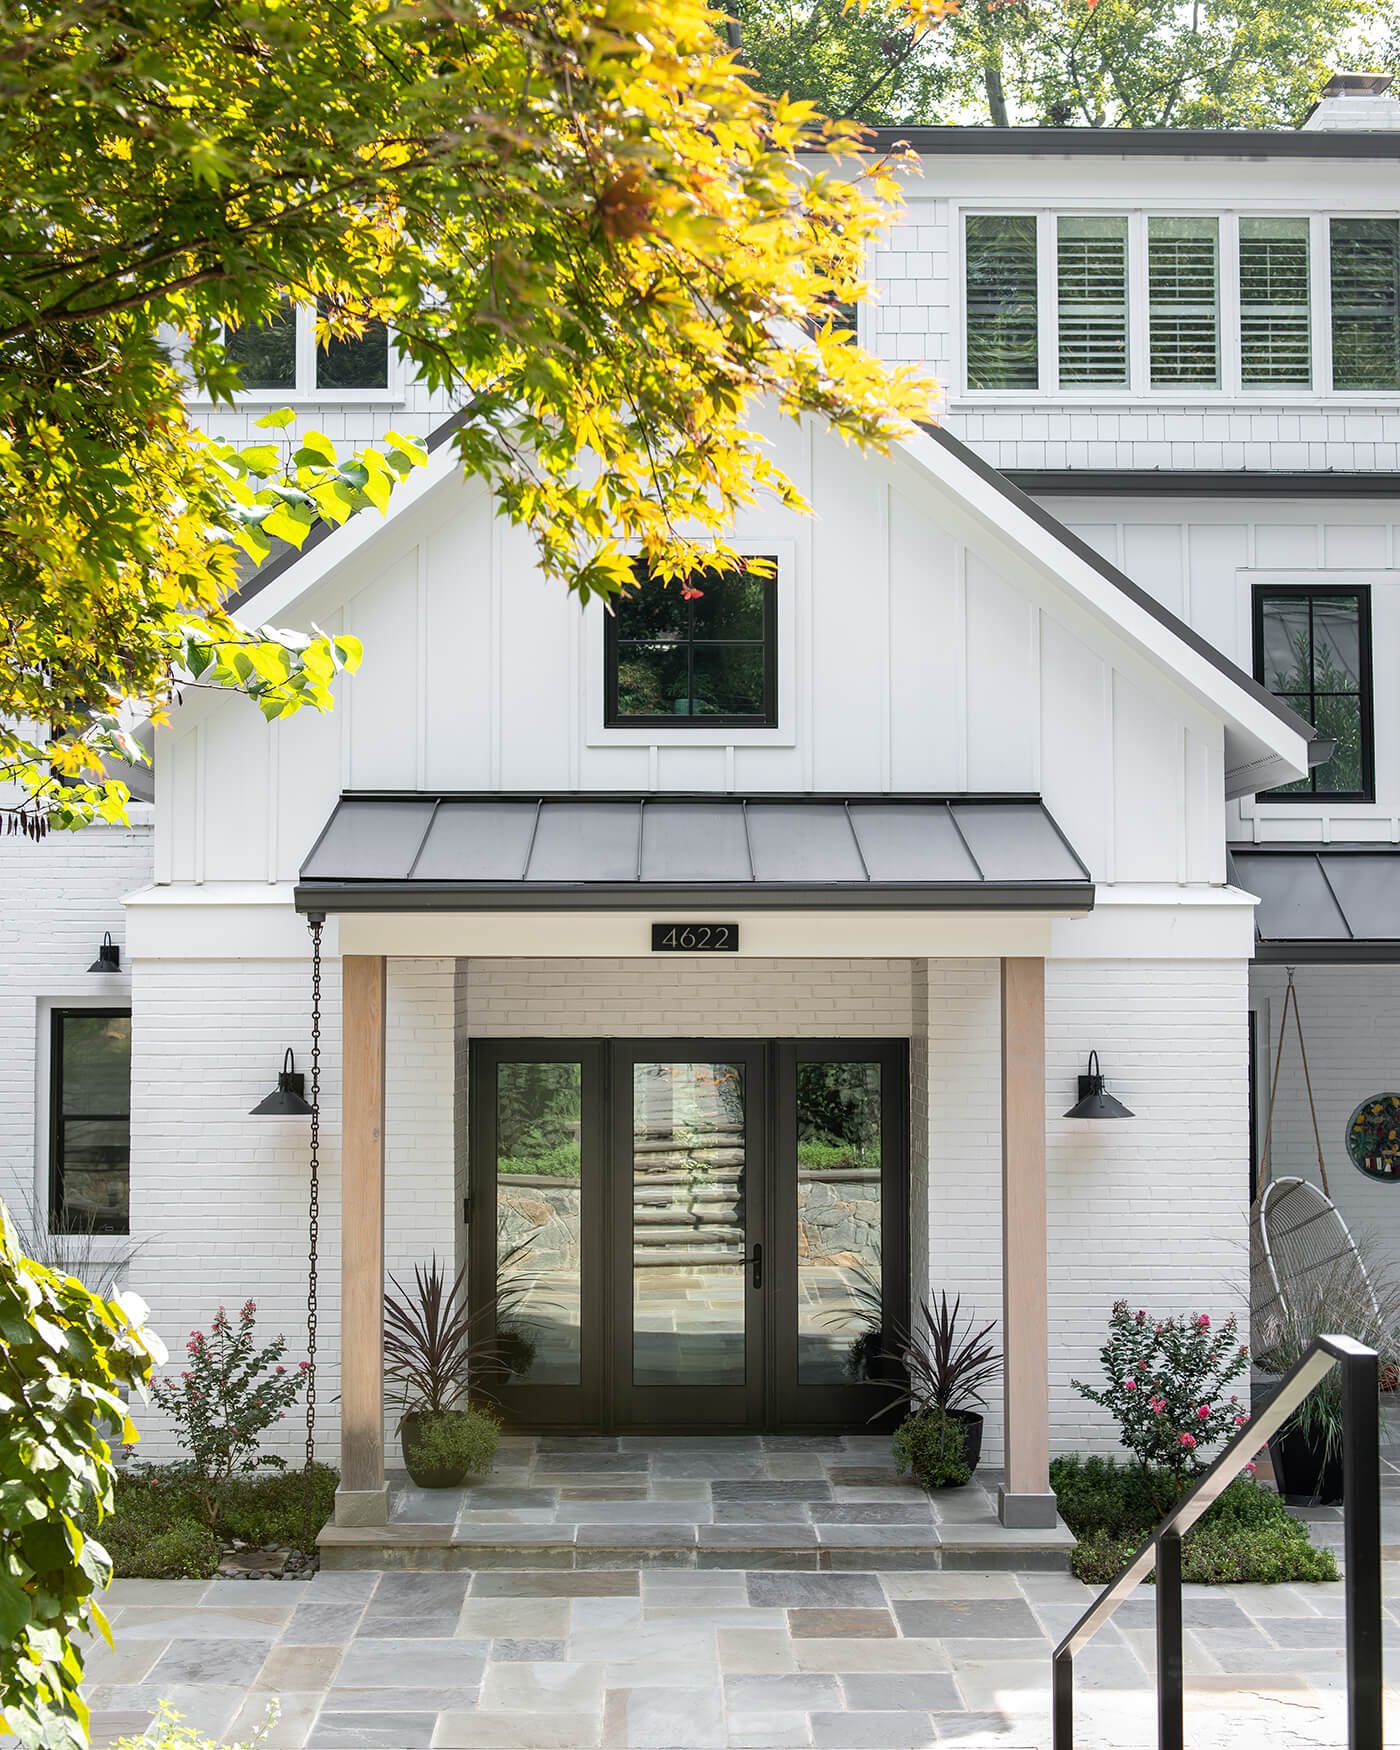 The exterior of a modern farmhouse style home with white paint, wood beams, and a black roof.